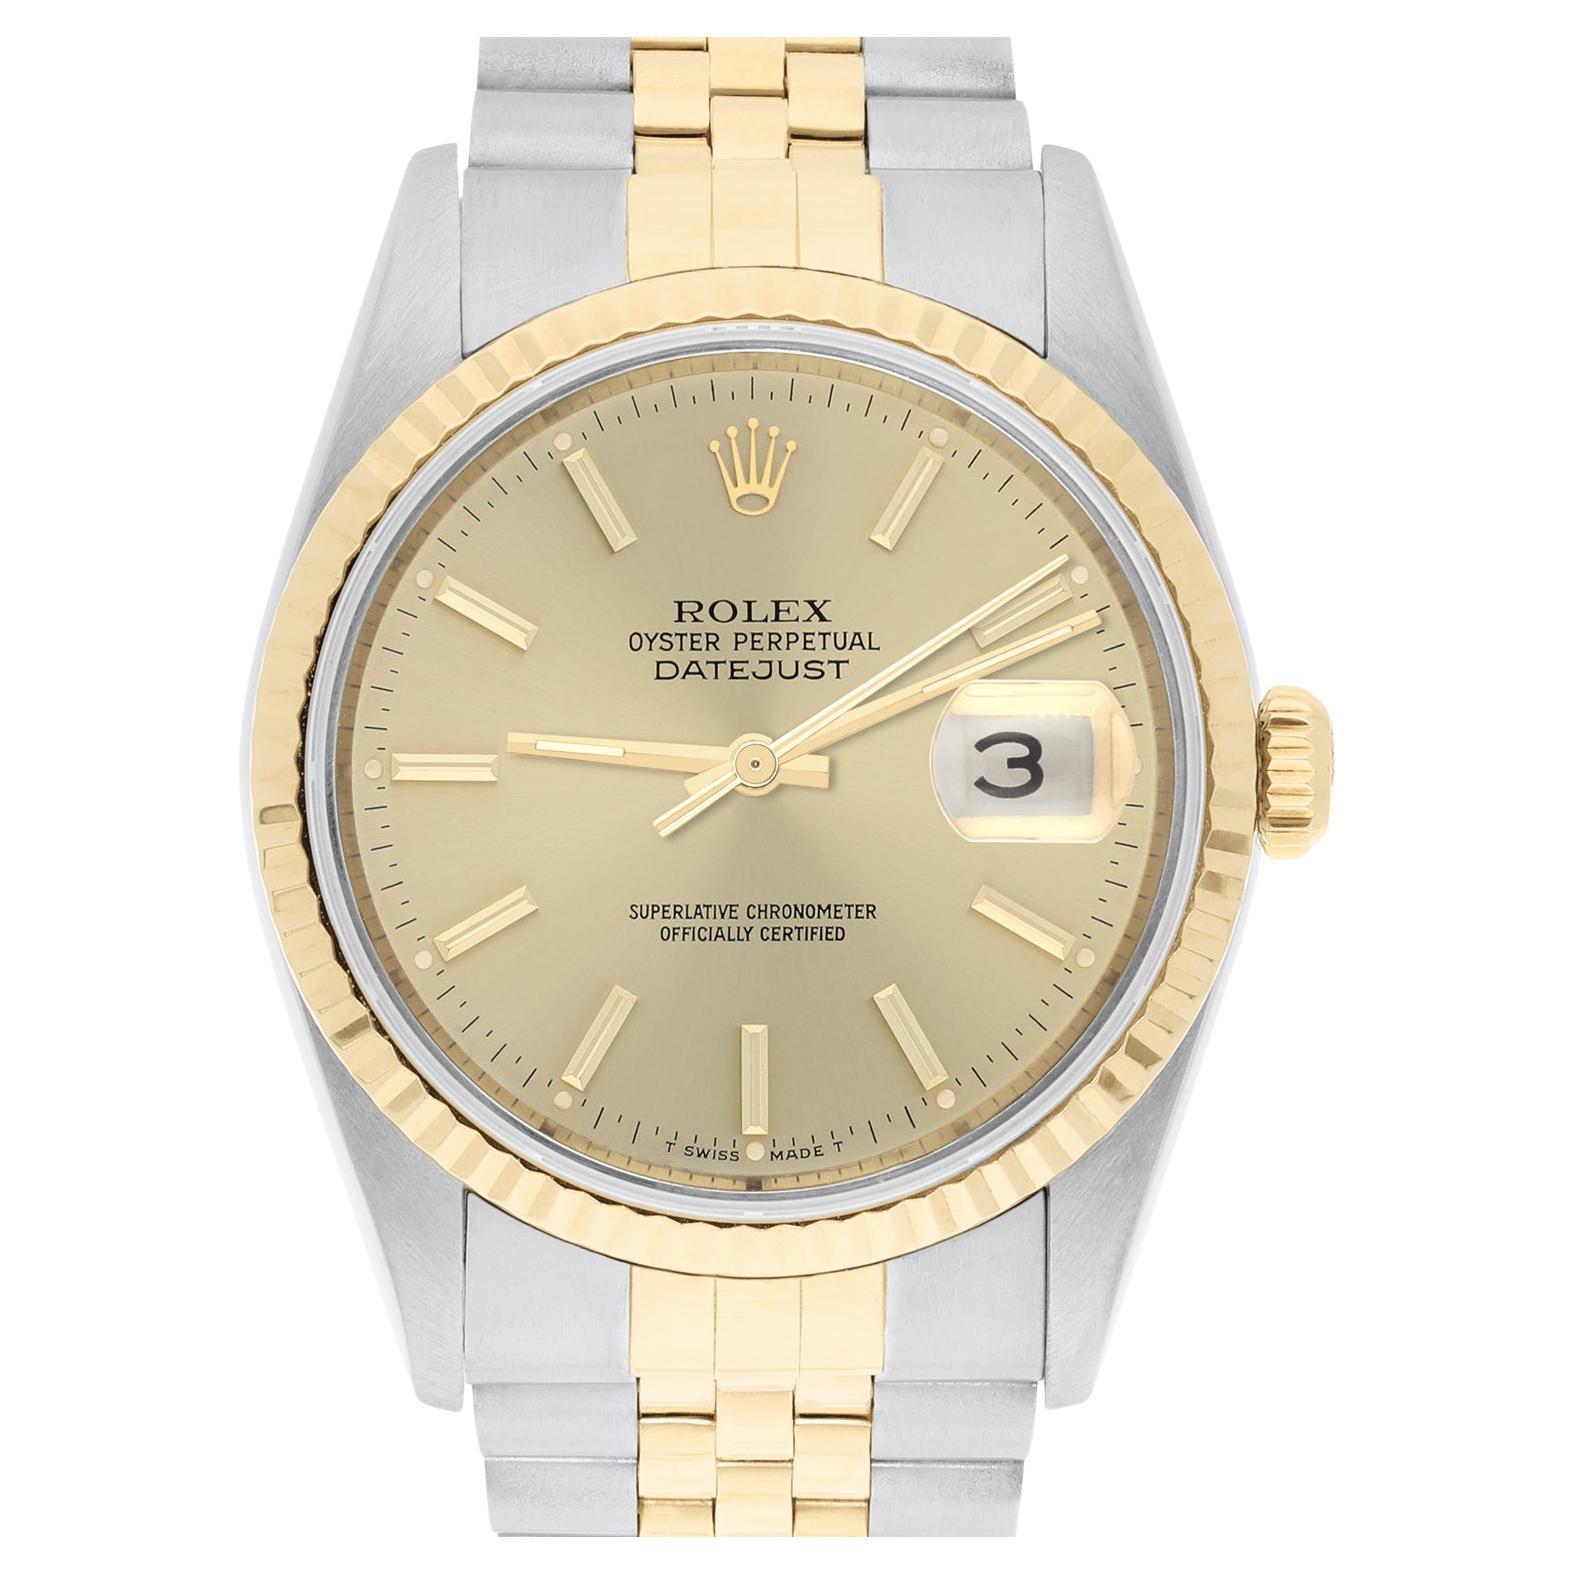 Rolex Datejust 36mm Two Tone Champagne Index Dial Jubilee 16233 Circa 1995 en vente